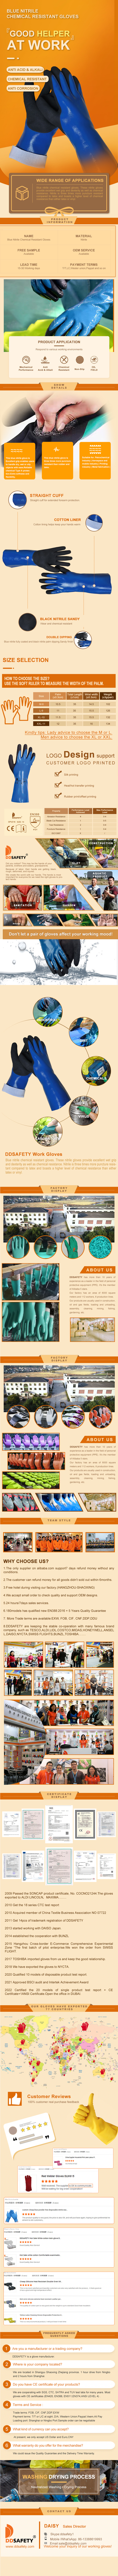 PVC Chemical Gloves, Thick Rubber Work Gloves, Heavy-Duty,Acid, Alkali and Oil, Non-Slip, Large - DPV216 PVC Chemical Gloves, Thick Rubber Work Gloves, Heavy-Duty,Acid, Alkali and Oil, Non-Slip, Large - DPV216 PVC Chemical Gloves,Rubber Work Gloves,Thick Rubber Work Gloves,Thick Rubber Work Gloves,Heavy-Duty,Acid